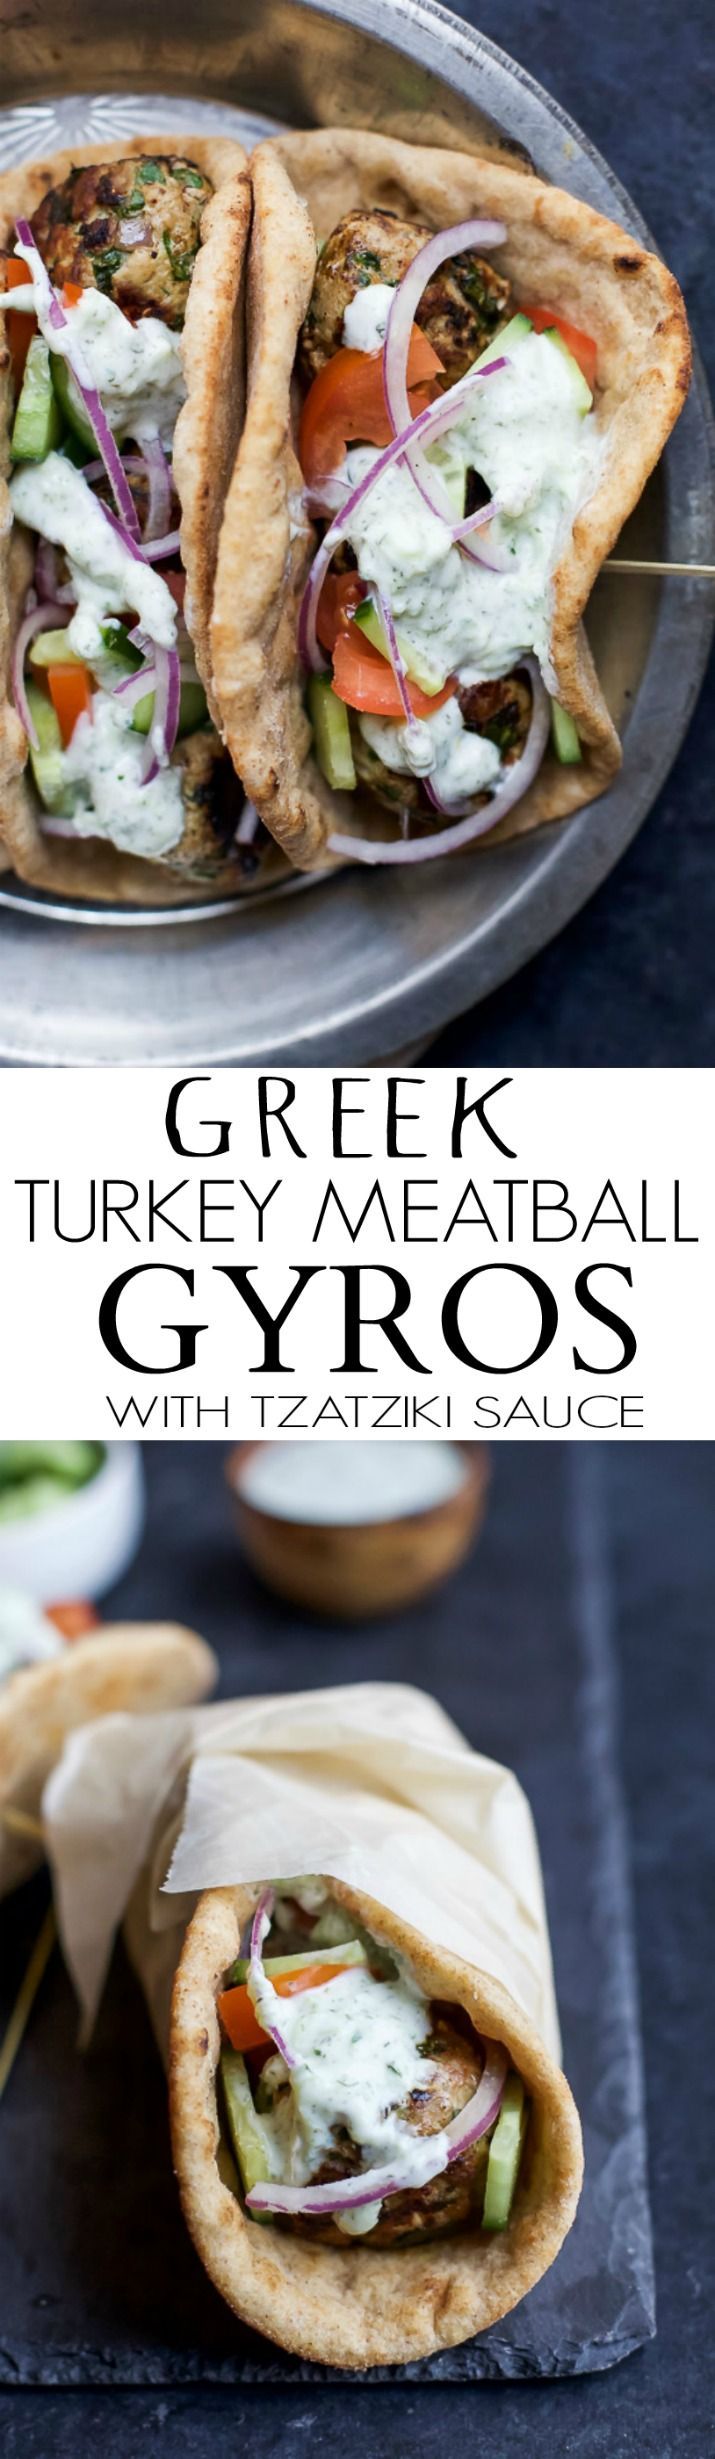 30 Minute Greek Turkey Meatball Gyros topped with a classic Tzatziki Sauce youll want to swim in! These Gyros are the perfect